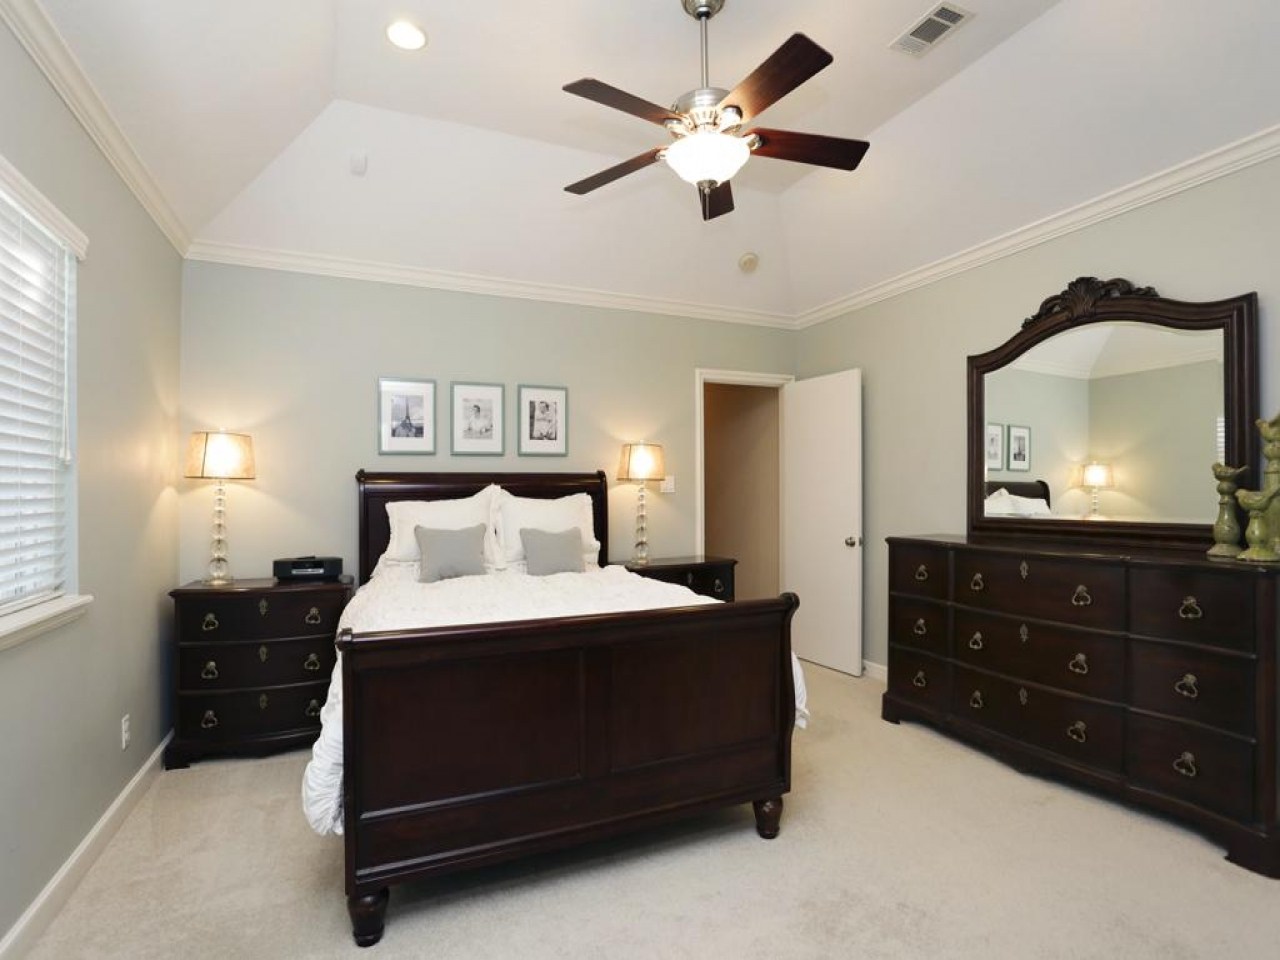 Master bedroom ceiling fans - 25 methods to save your ...